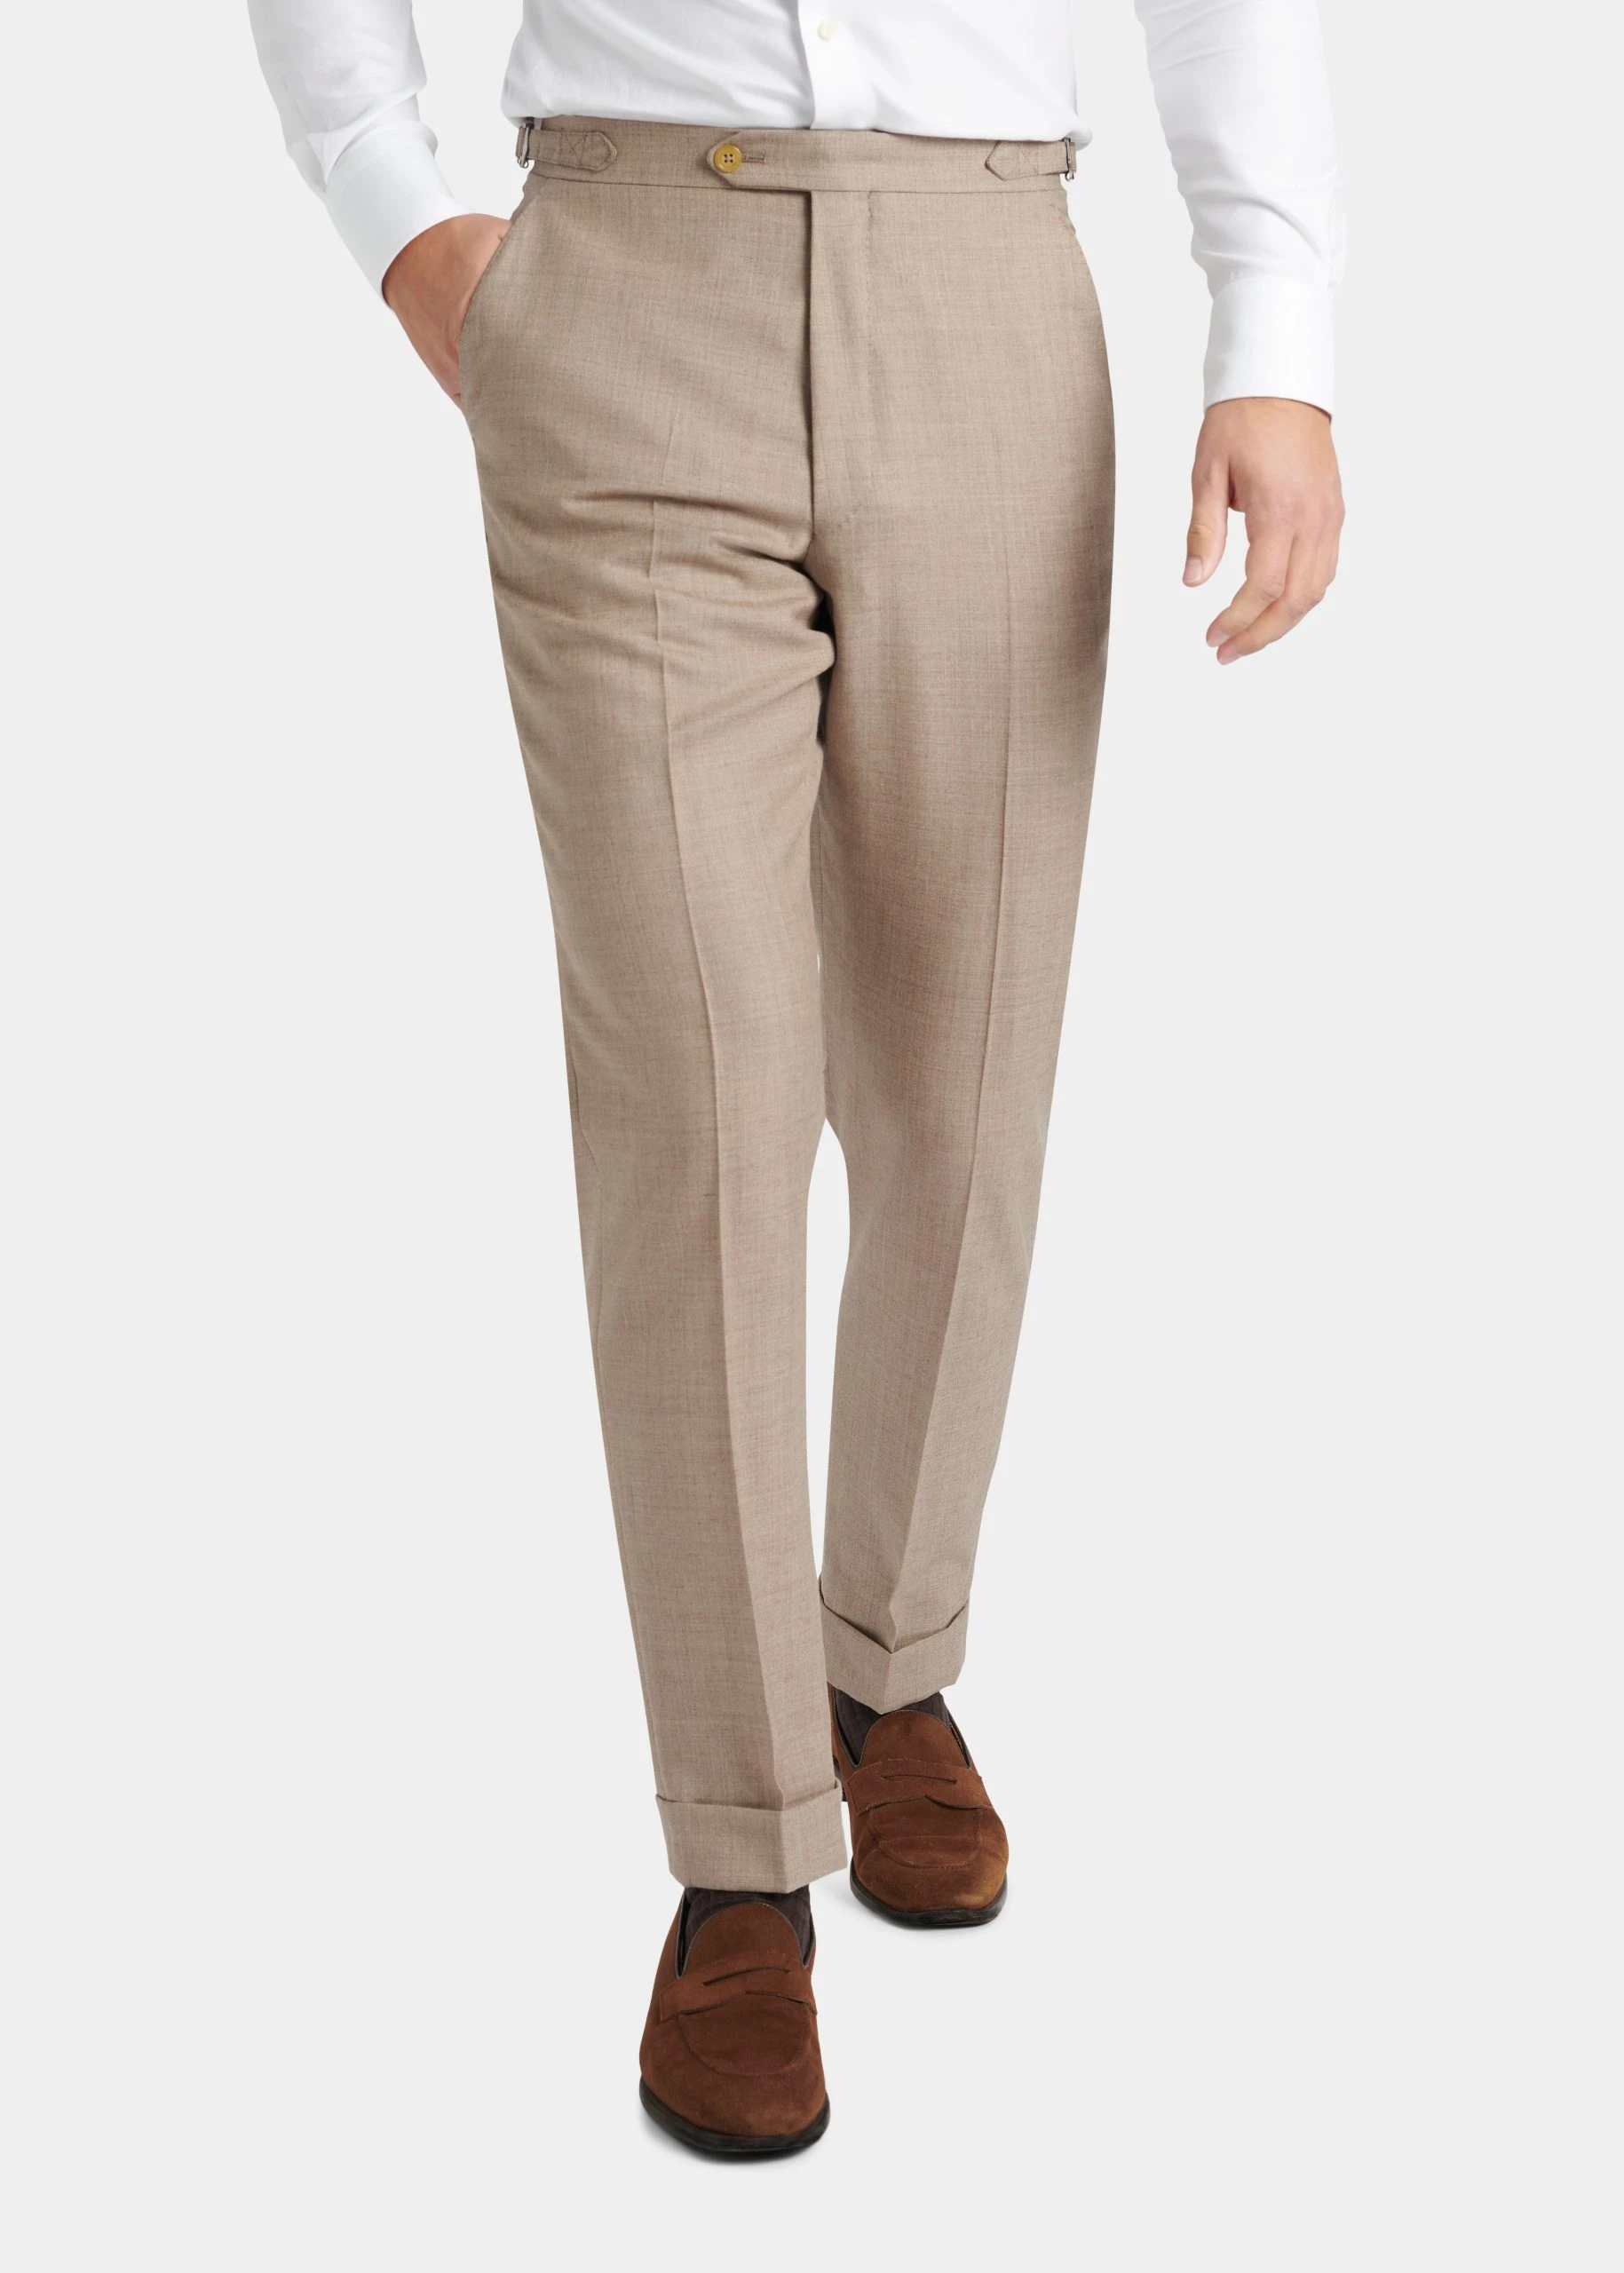 tan suit trousers in twistair fabric